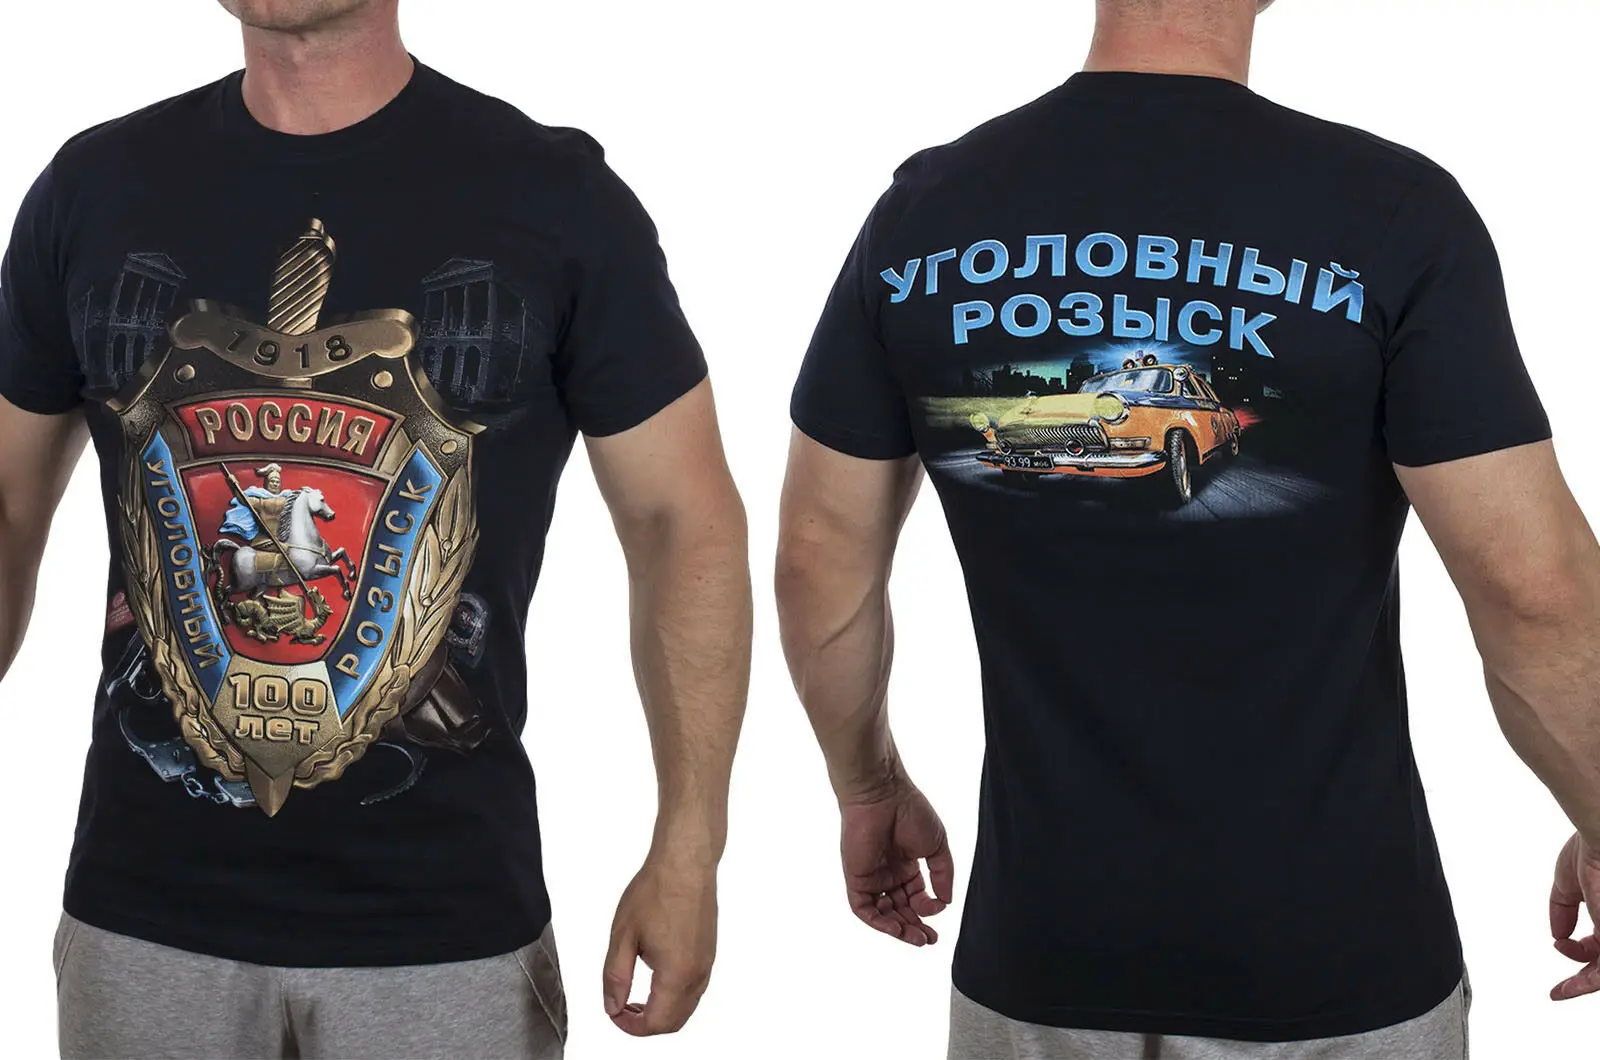 

Moscow Lubyanka Criminal Investigation Department of Russia T-Shirts Cotton O-Neck Short Sleeve T-Shirt New Size S-3XL